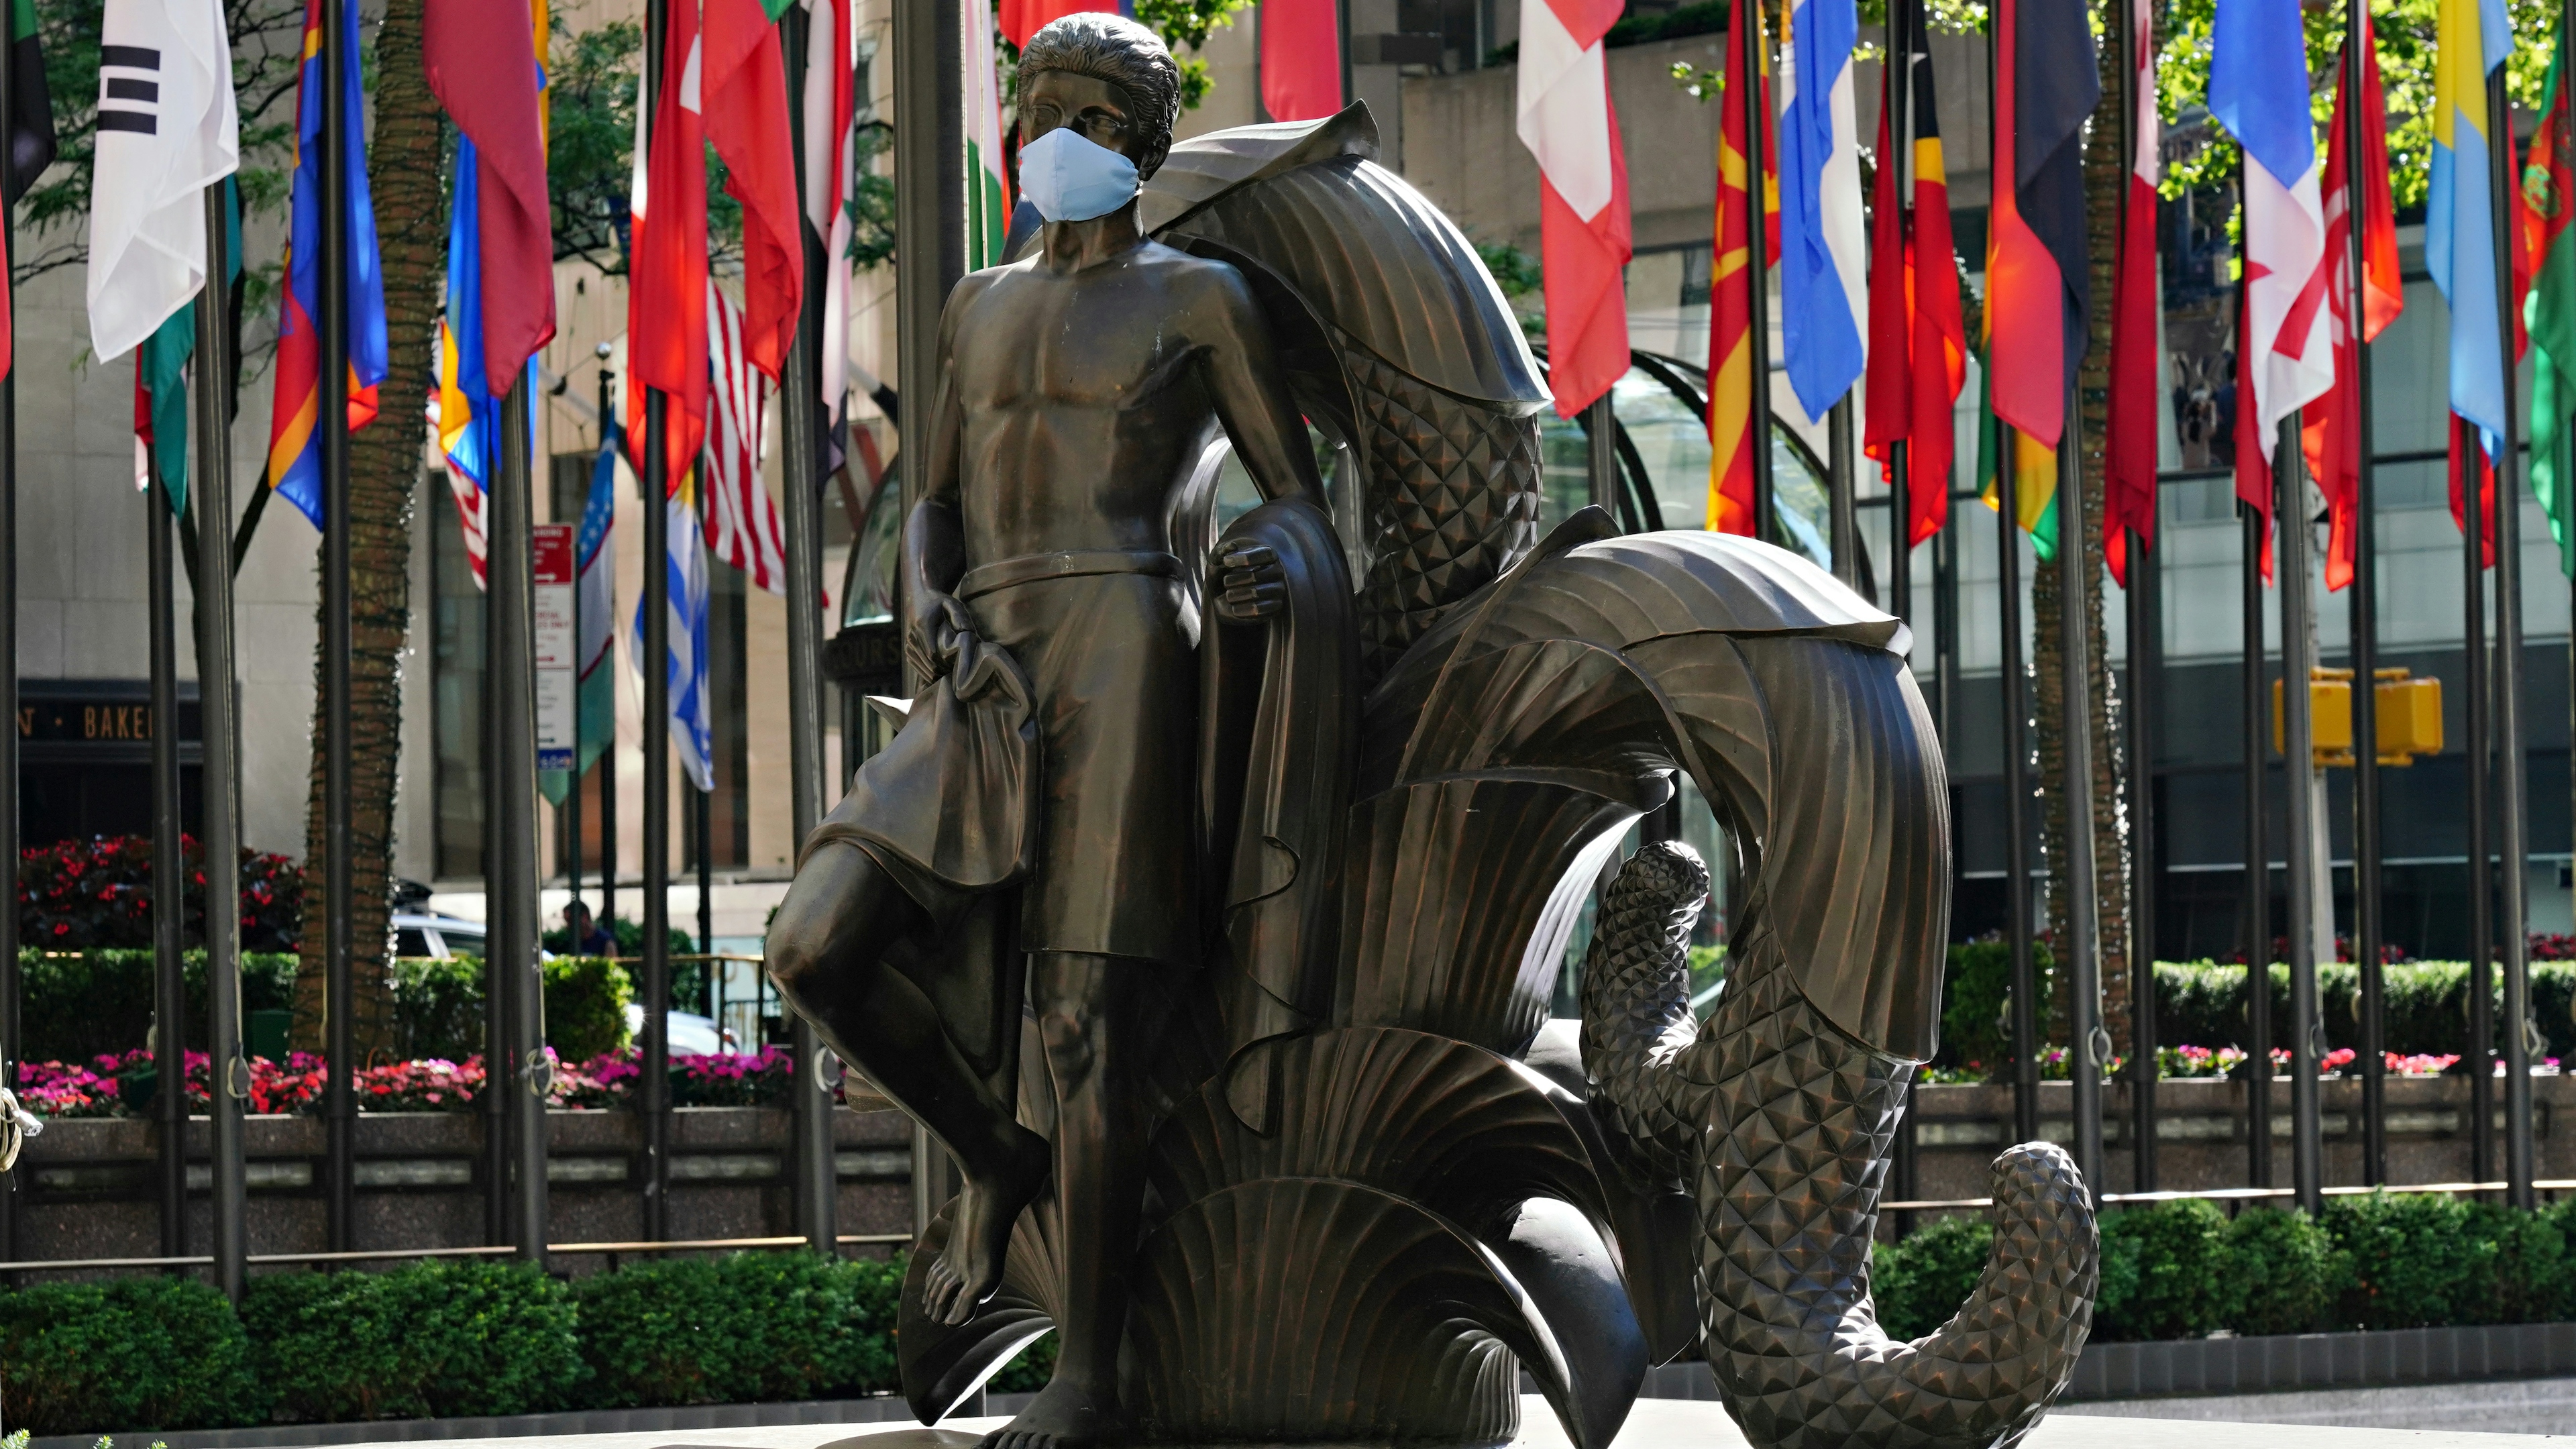 Paul Manship's 'Youth' statue in Rockefeller Center wears a mask to coincide with New York City moving into the phase two re-opening from the coronavirus pandemic.